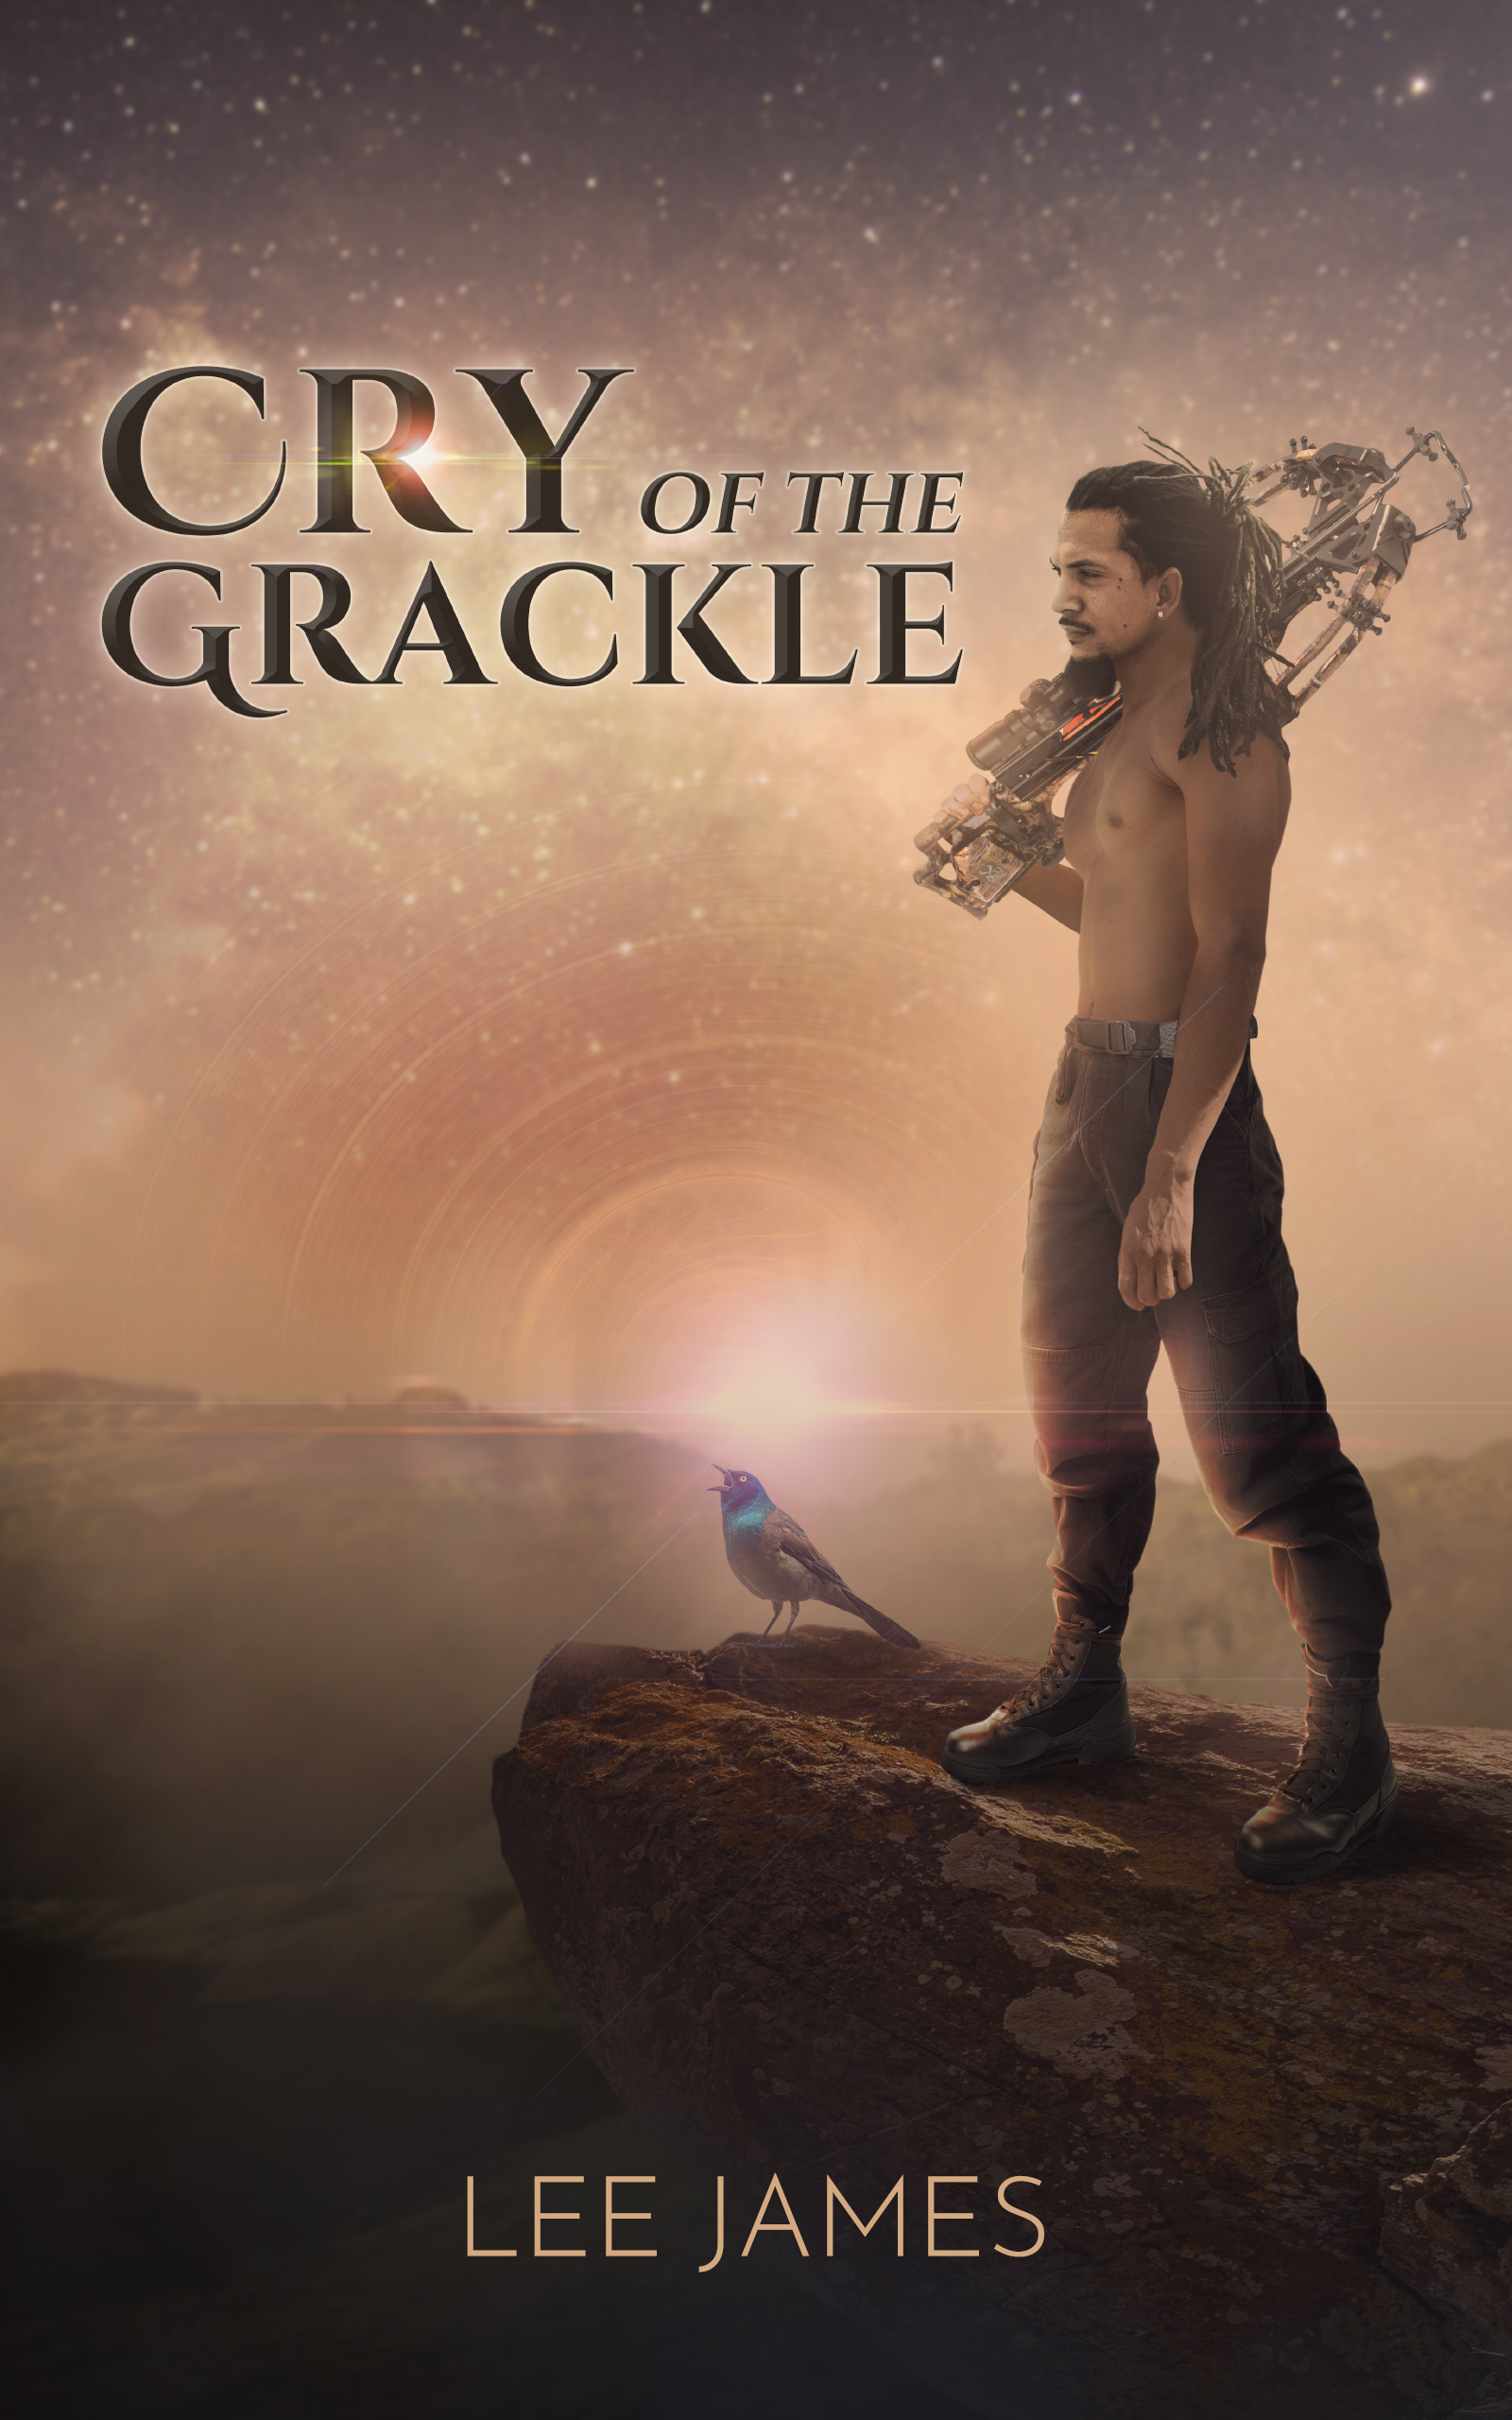 Cry-of-the-Grackle-cover-Kindle-2560x1600px.jpg